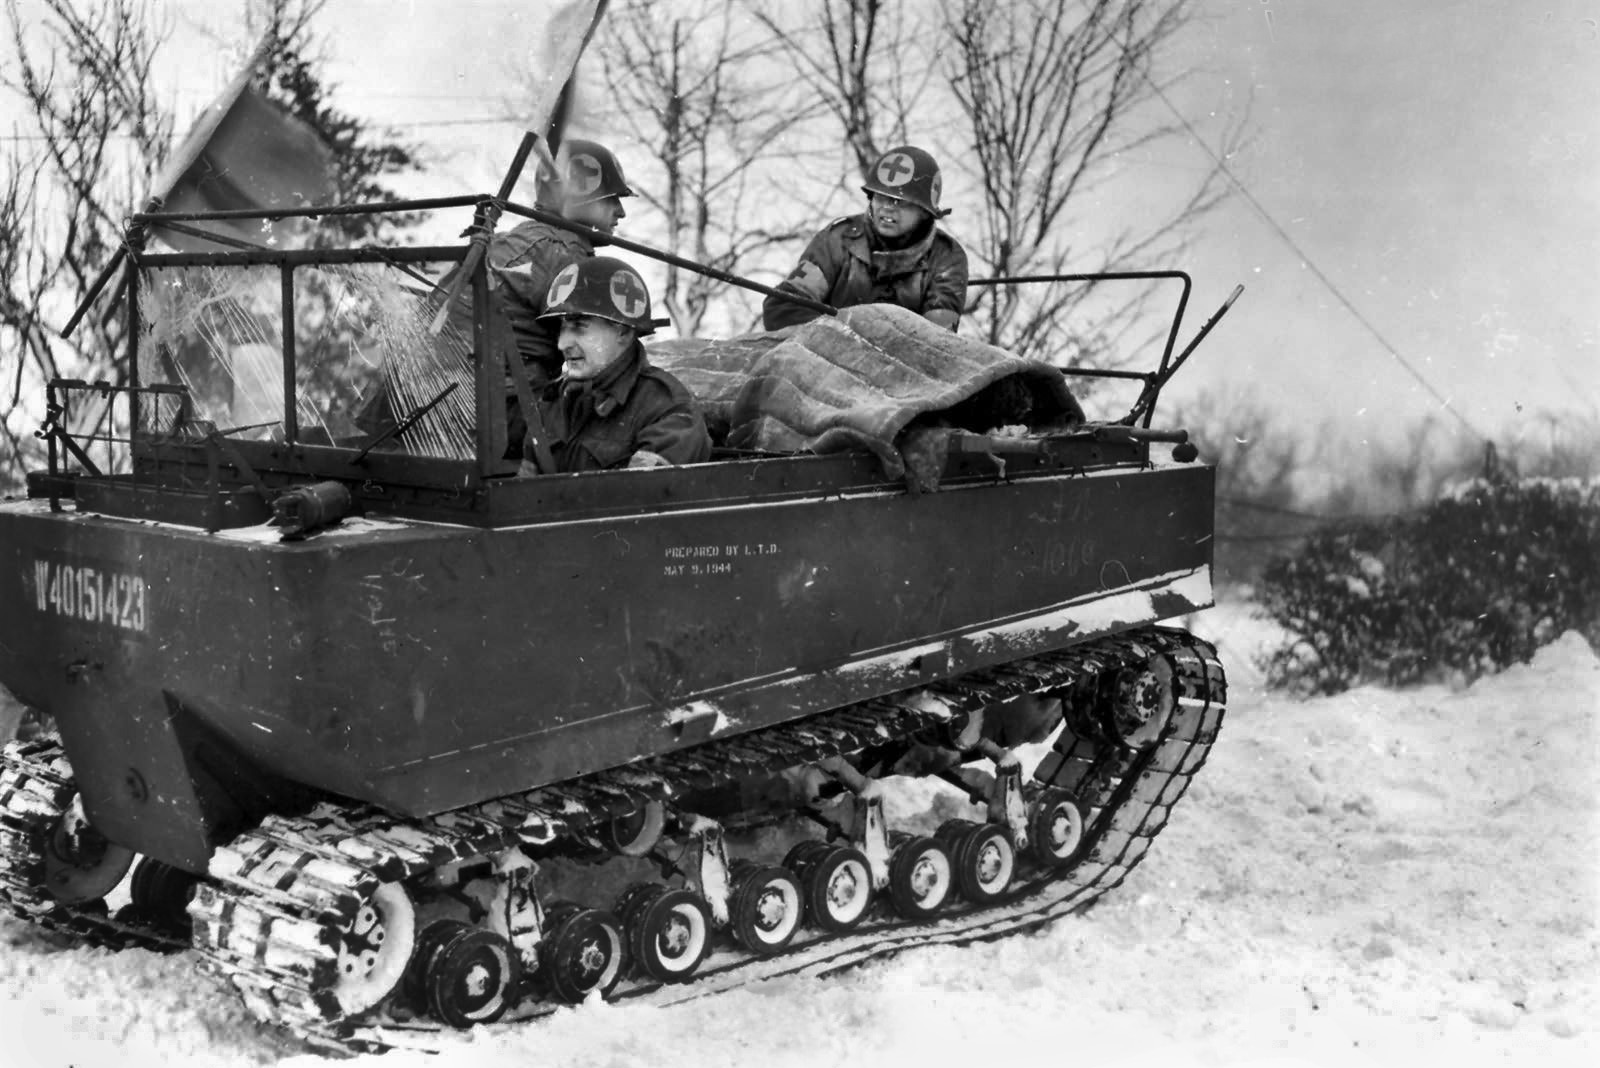 The M29 Weasel, a tracked vehicle made for operations in winter weather, was suggested by Pyke. This example belongs to the 79th Infantry Division operating in France in January 1945.